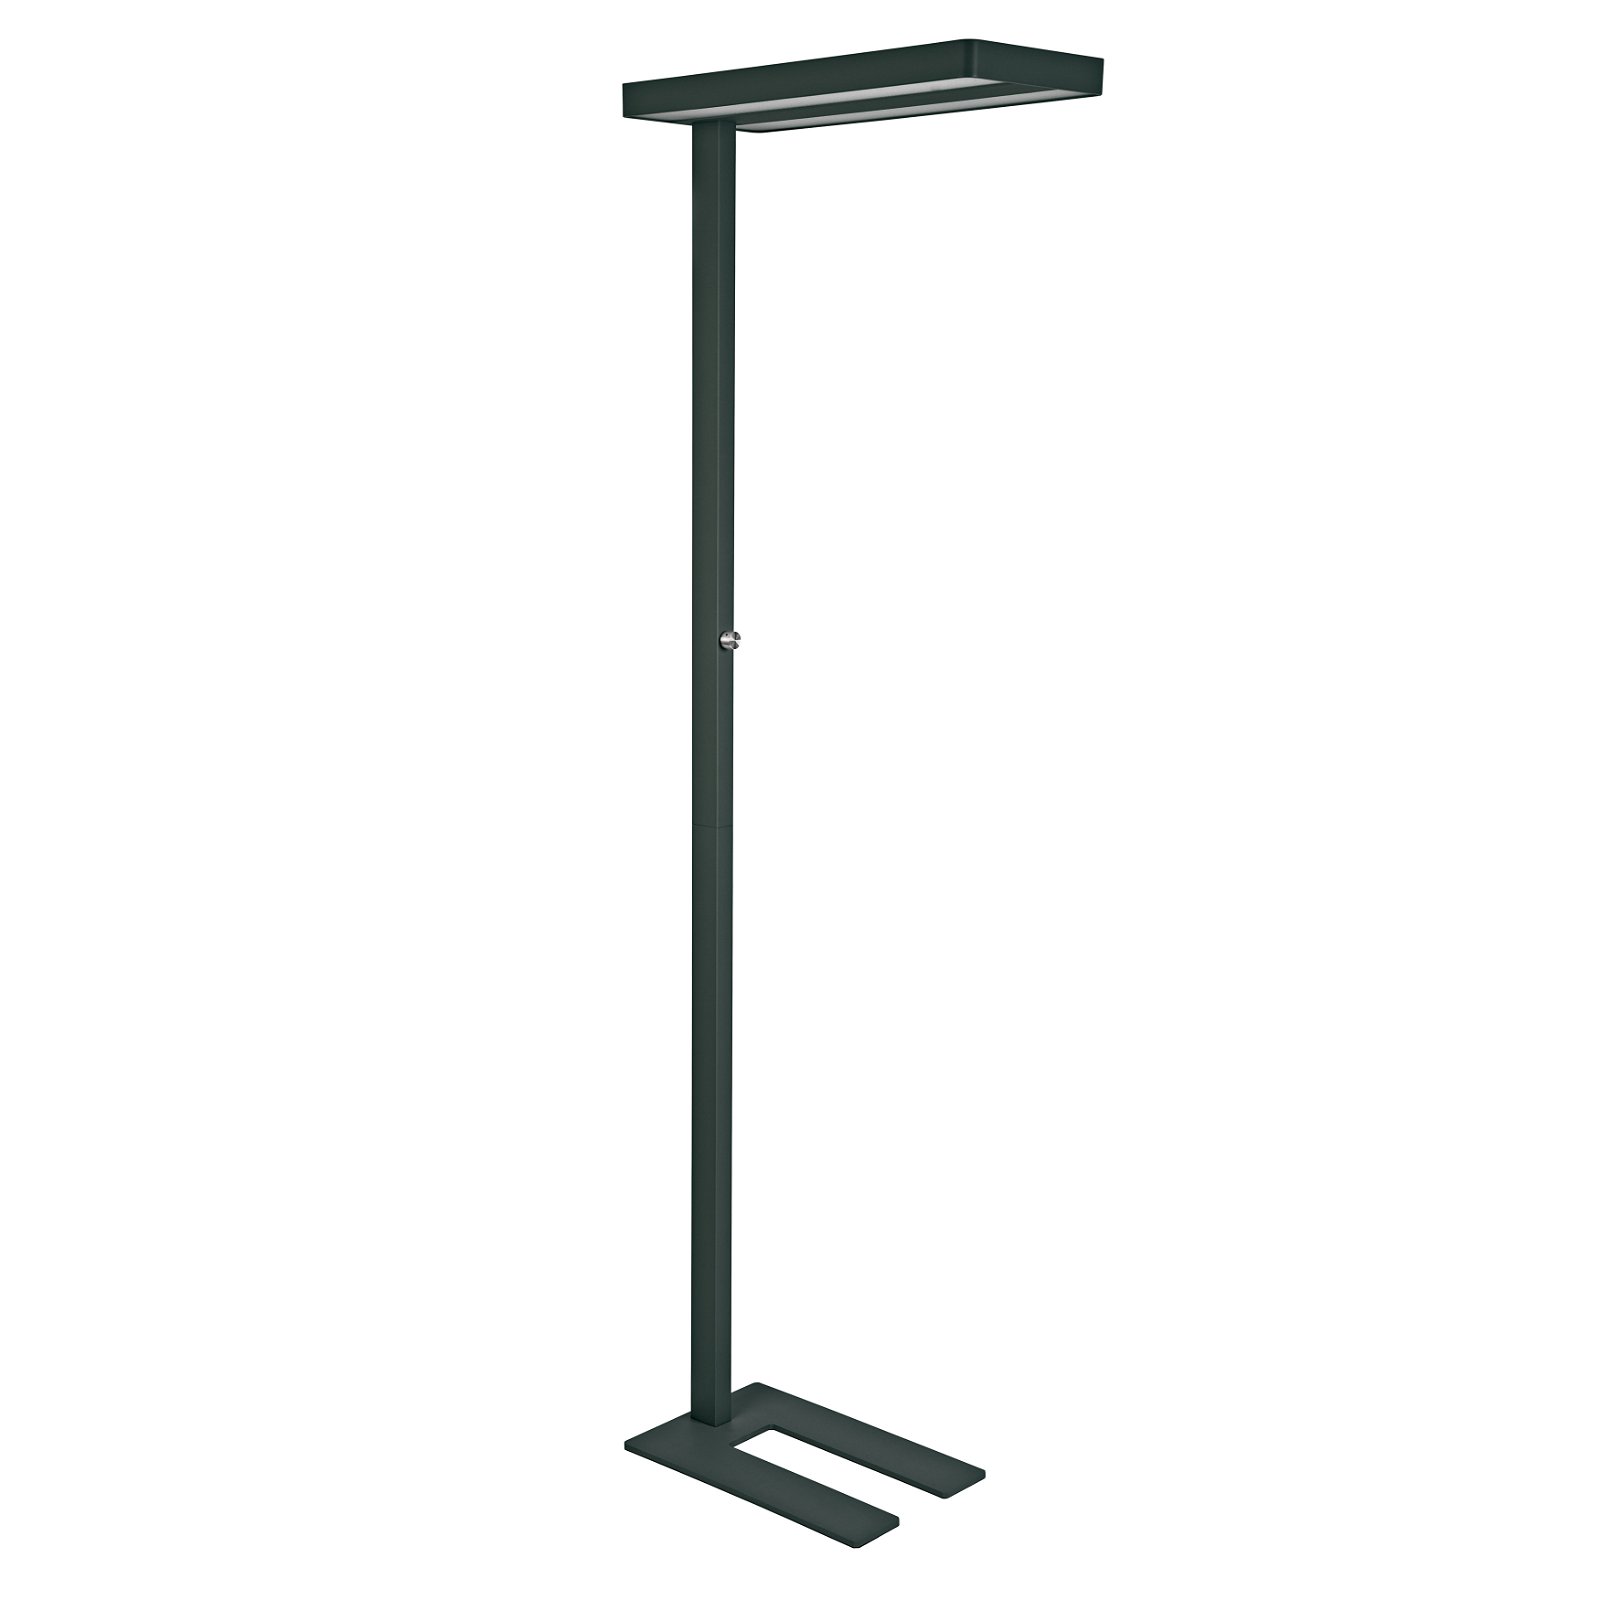 LED floor lamp MAULjaval, dimmable